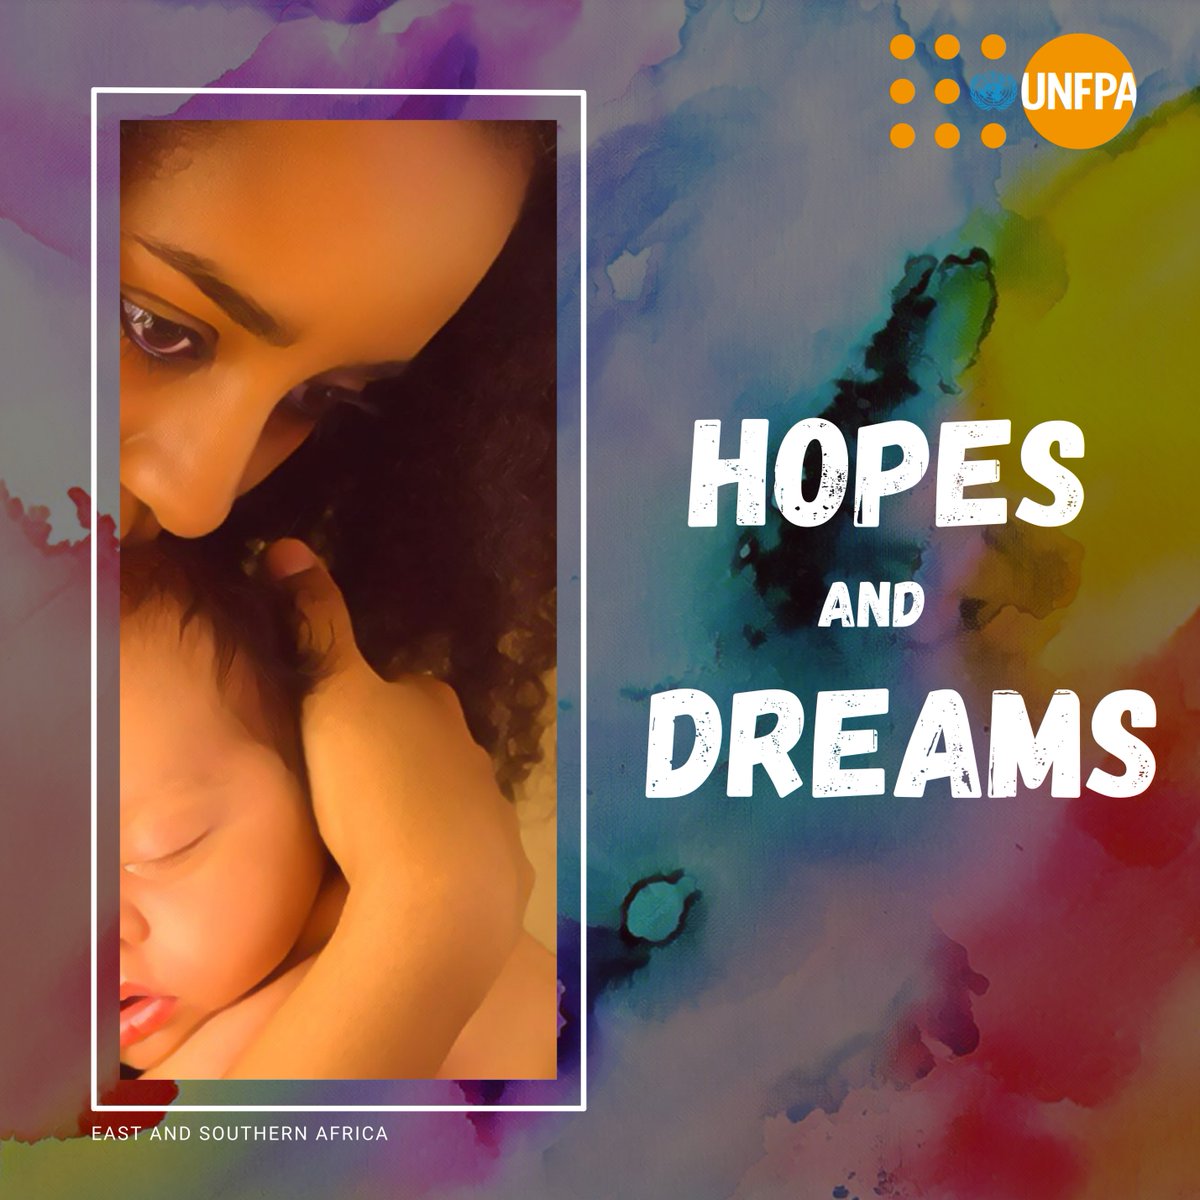 Our collective dream: Ending maternal death.

Through reproductive health care, which includes #maternalhealthservices and #familyplanning, we enable women to protect their health and choose the number, timing & spacing of their children. 

#HopesAndDreams